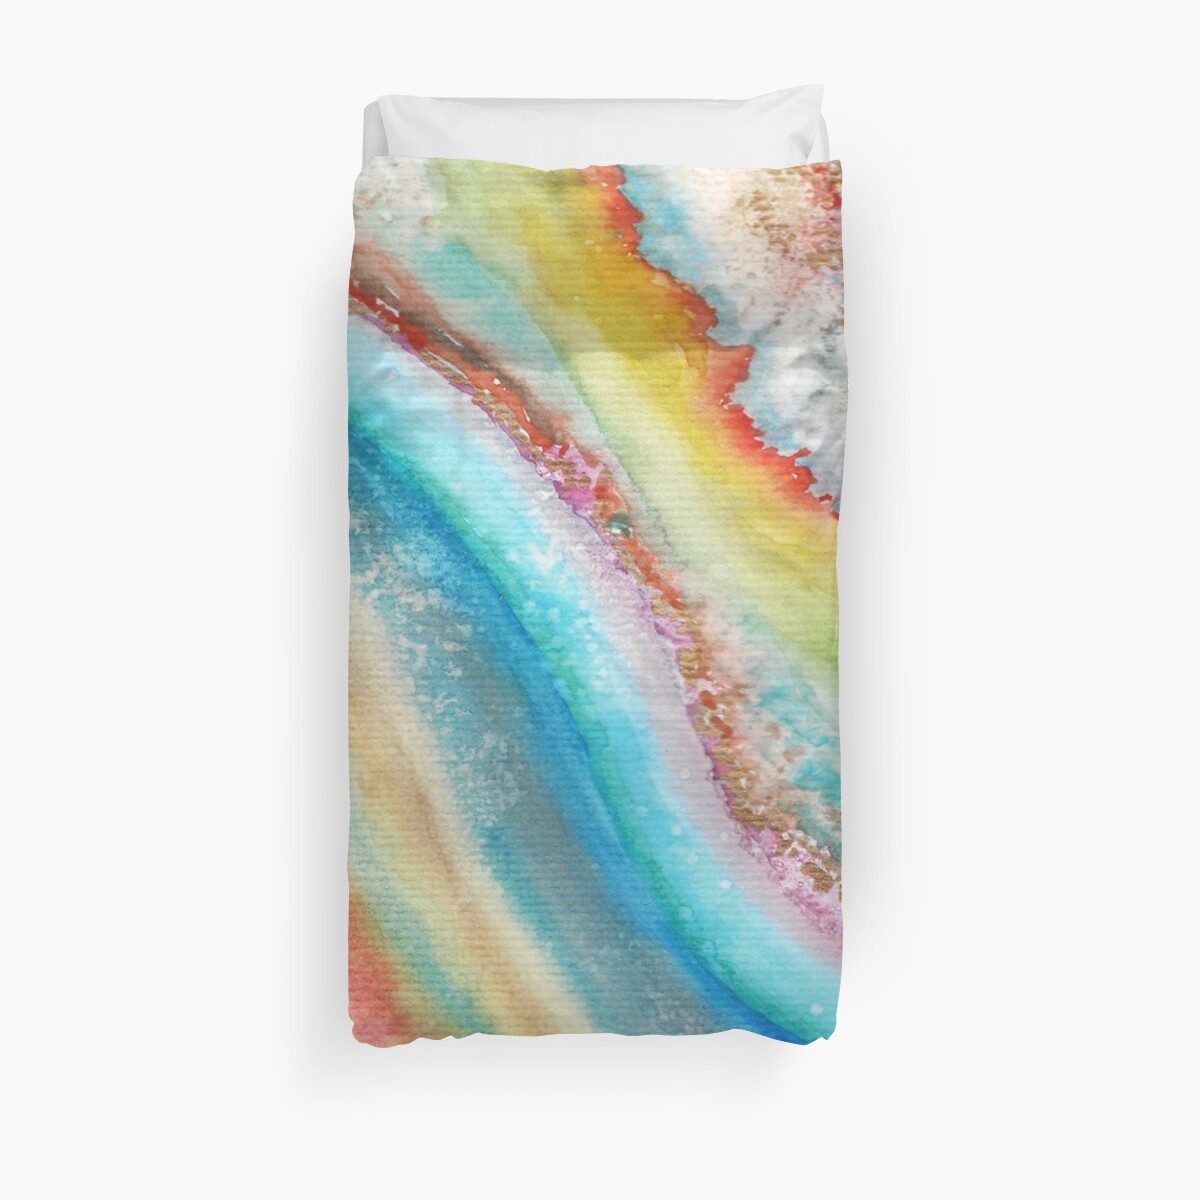 AGATE Inspired Watercolor Abstract 01 Duvet Cover